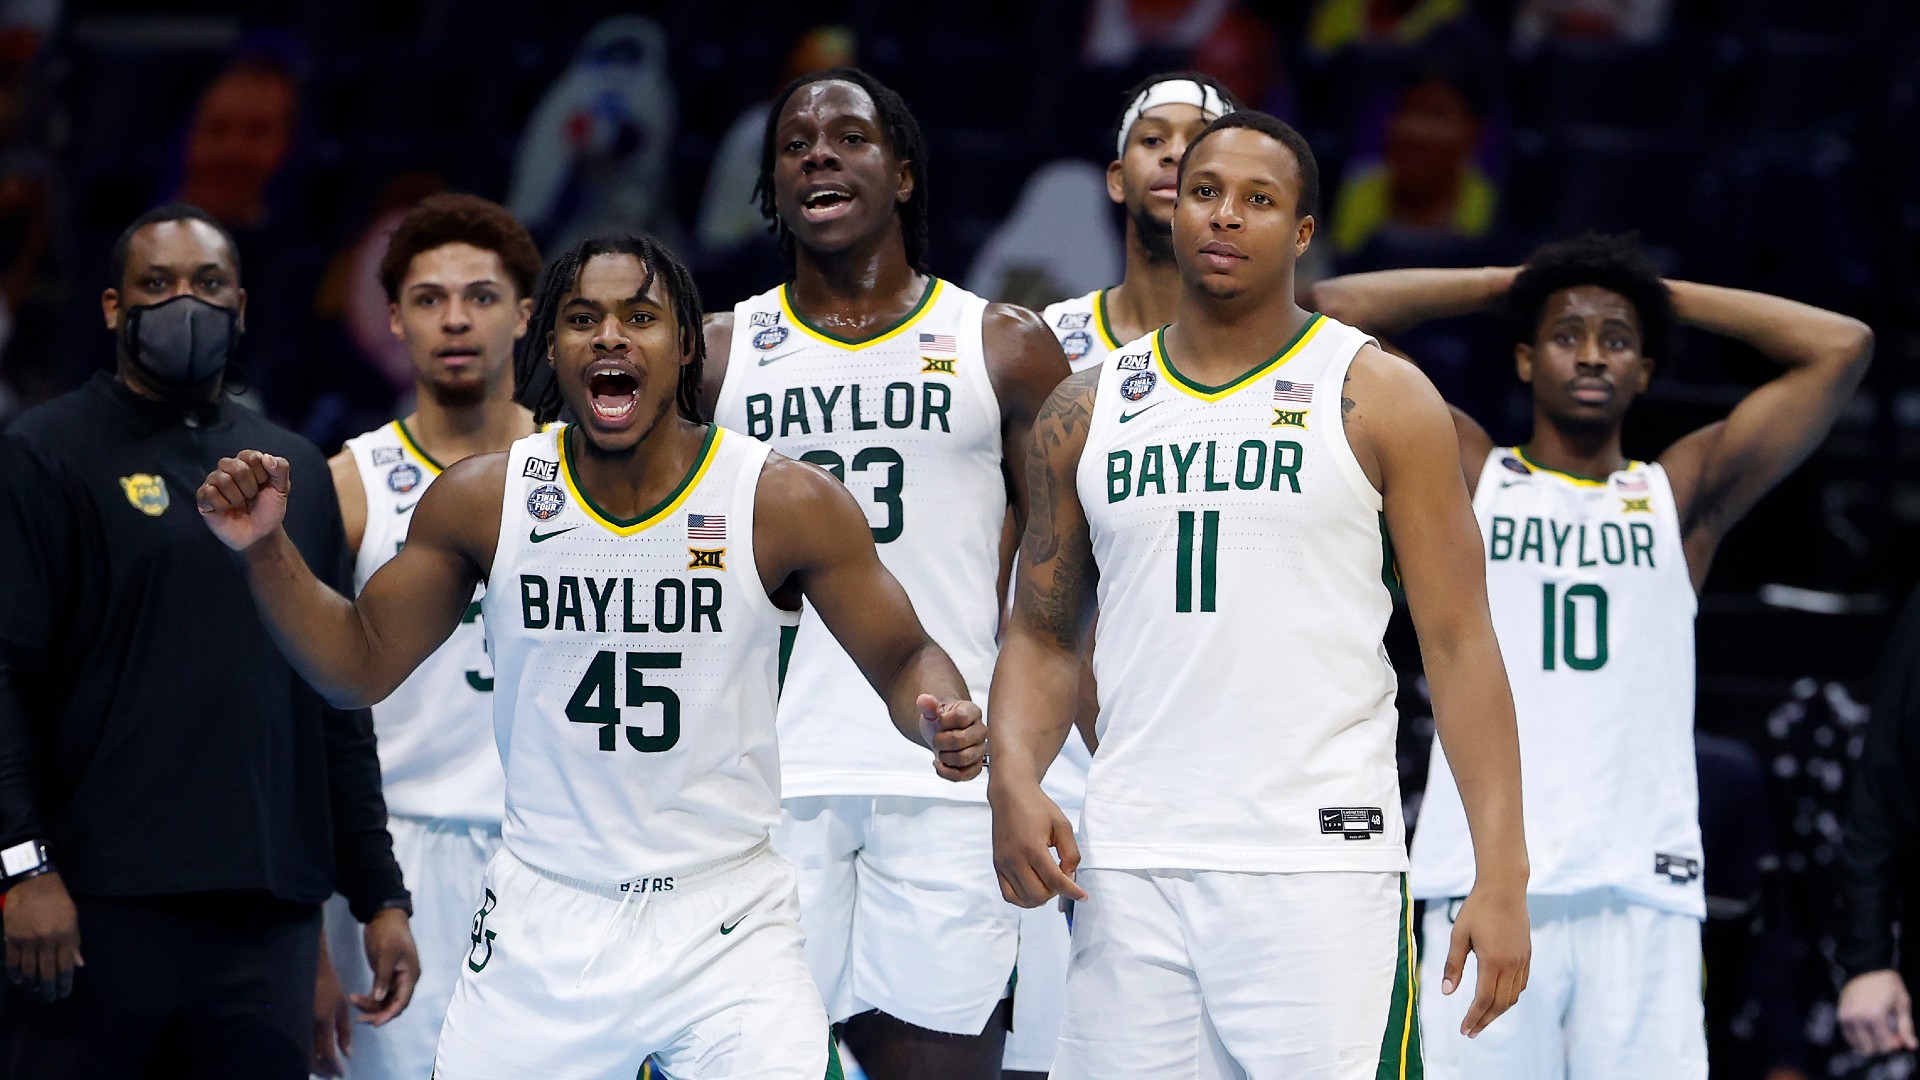 Baylor had to wait a year to reach the Final Four — and Houston paid